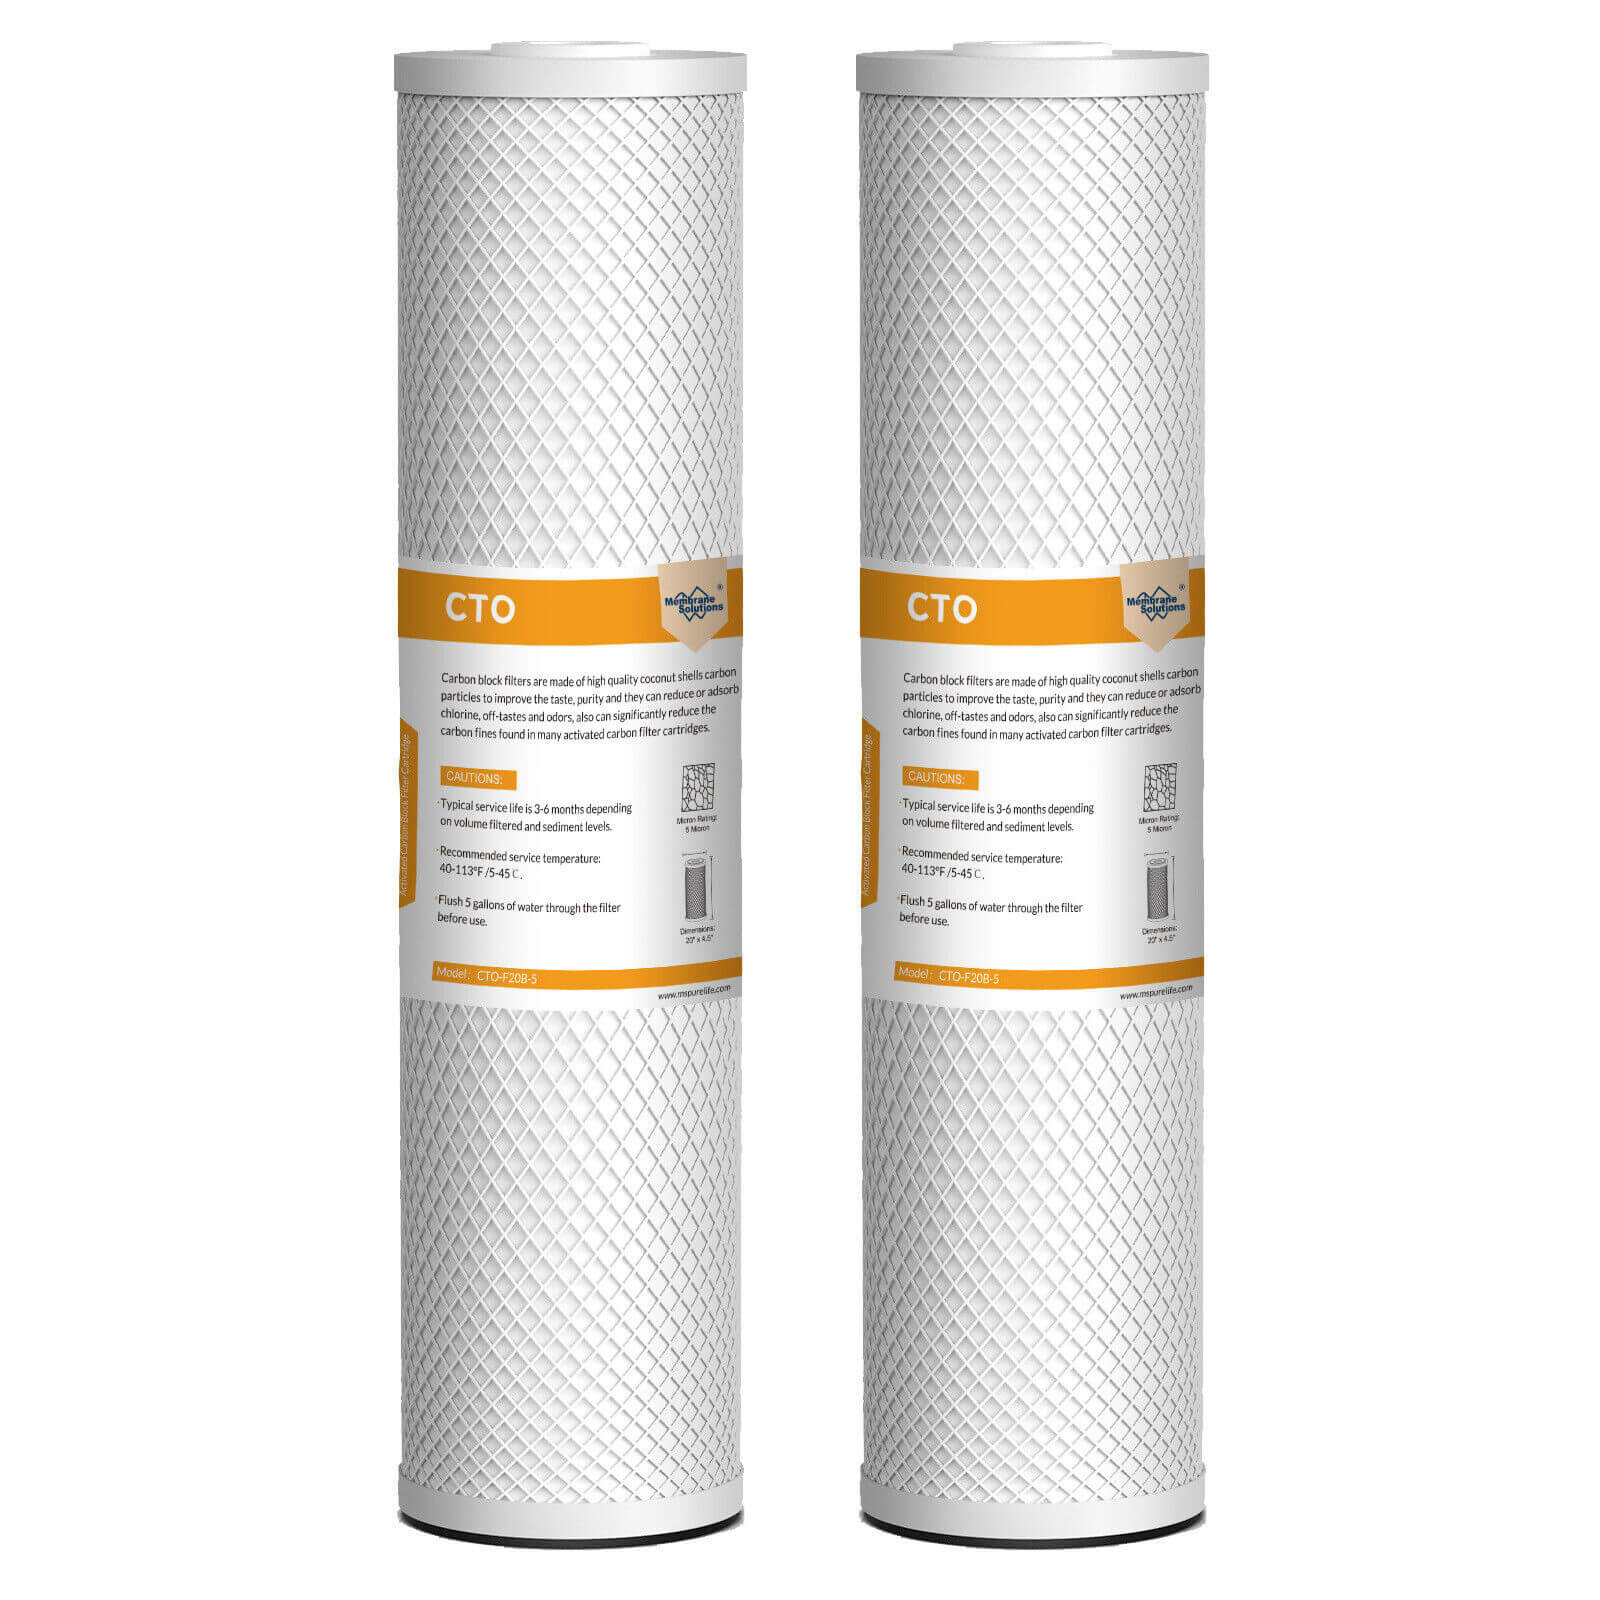 Membrane Solutions 20" x 4.5" 20 inch Coconut Shell Activated Carbon Block Filter Whole House Sediment Water Filter Cartridge Replacement